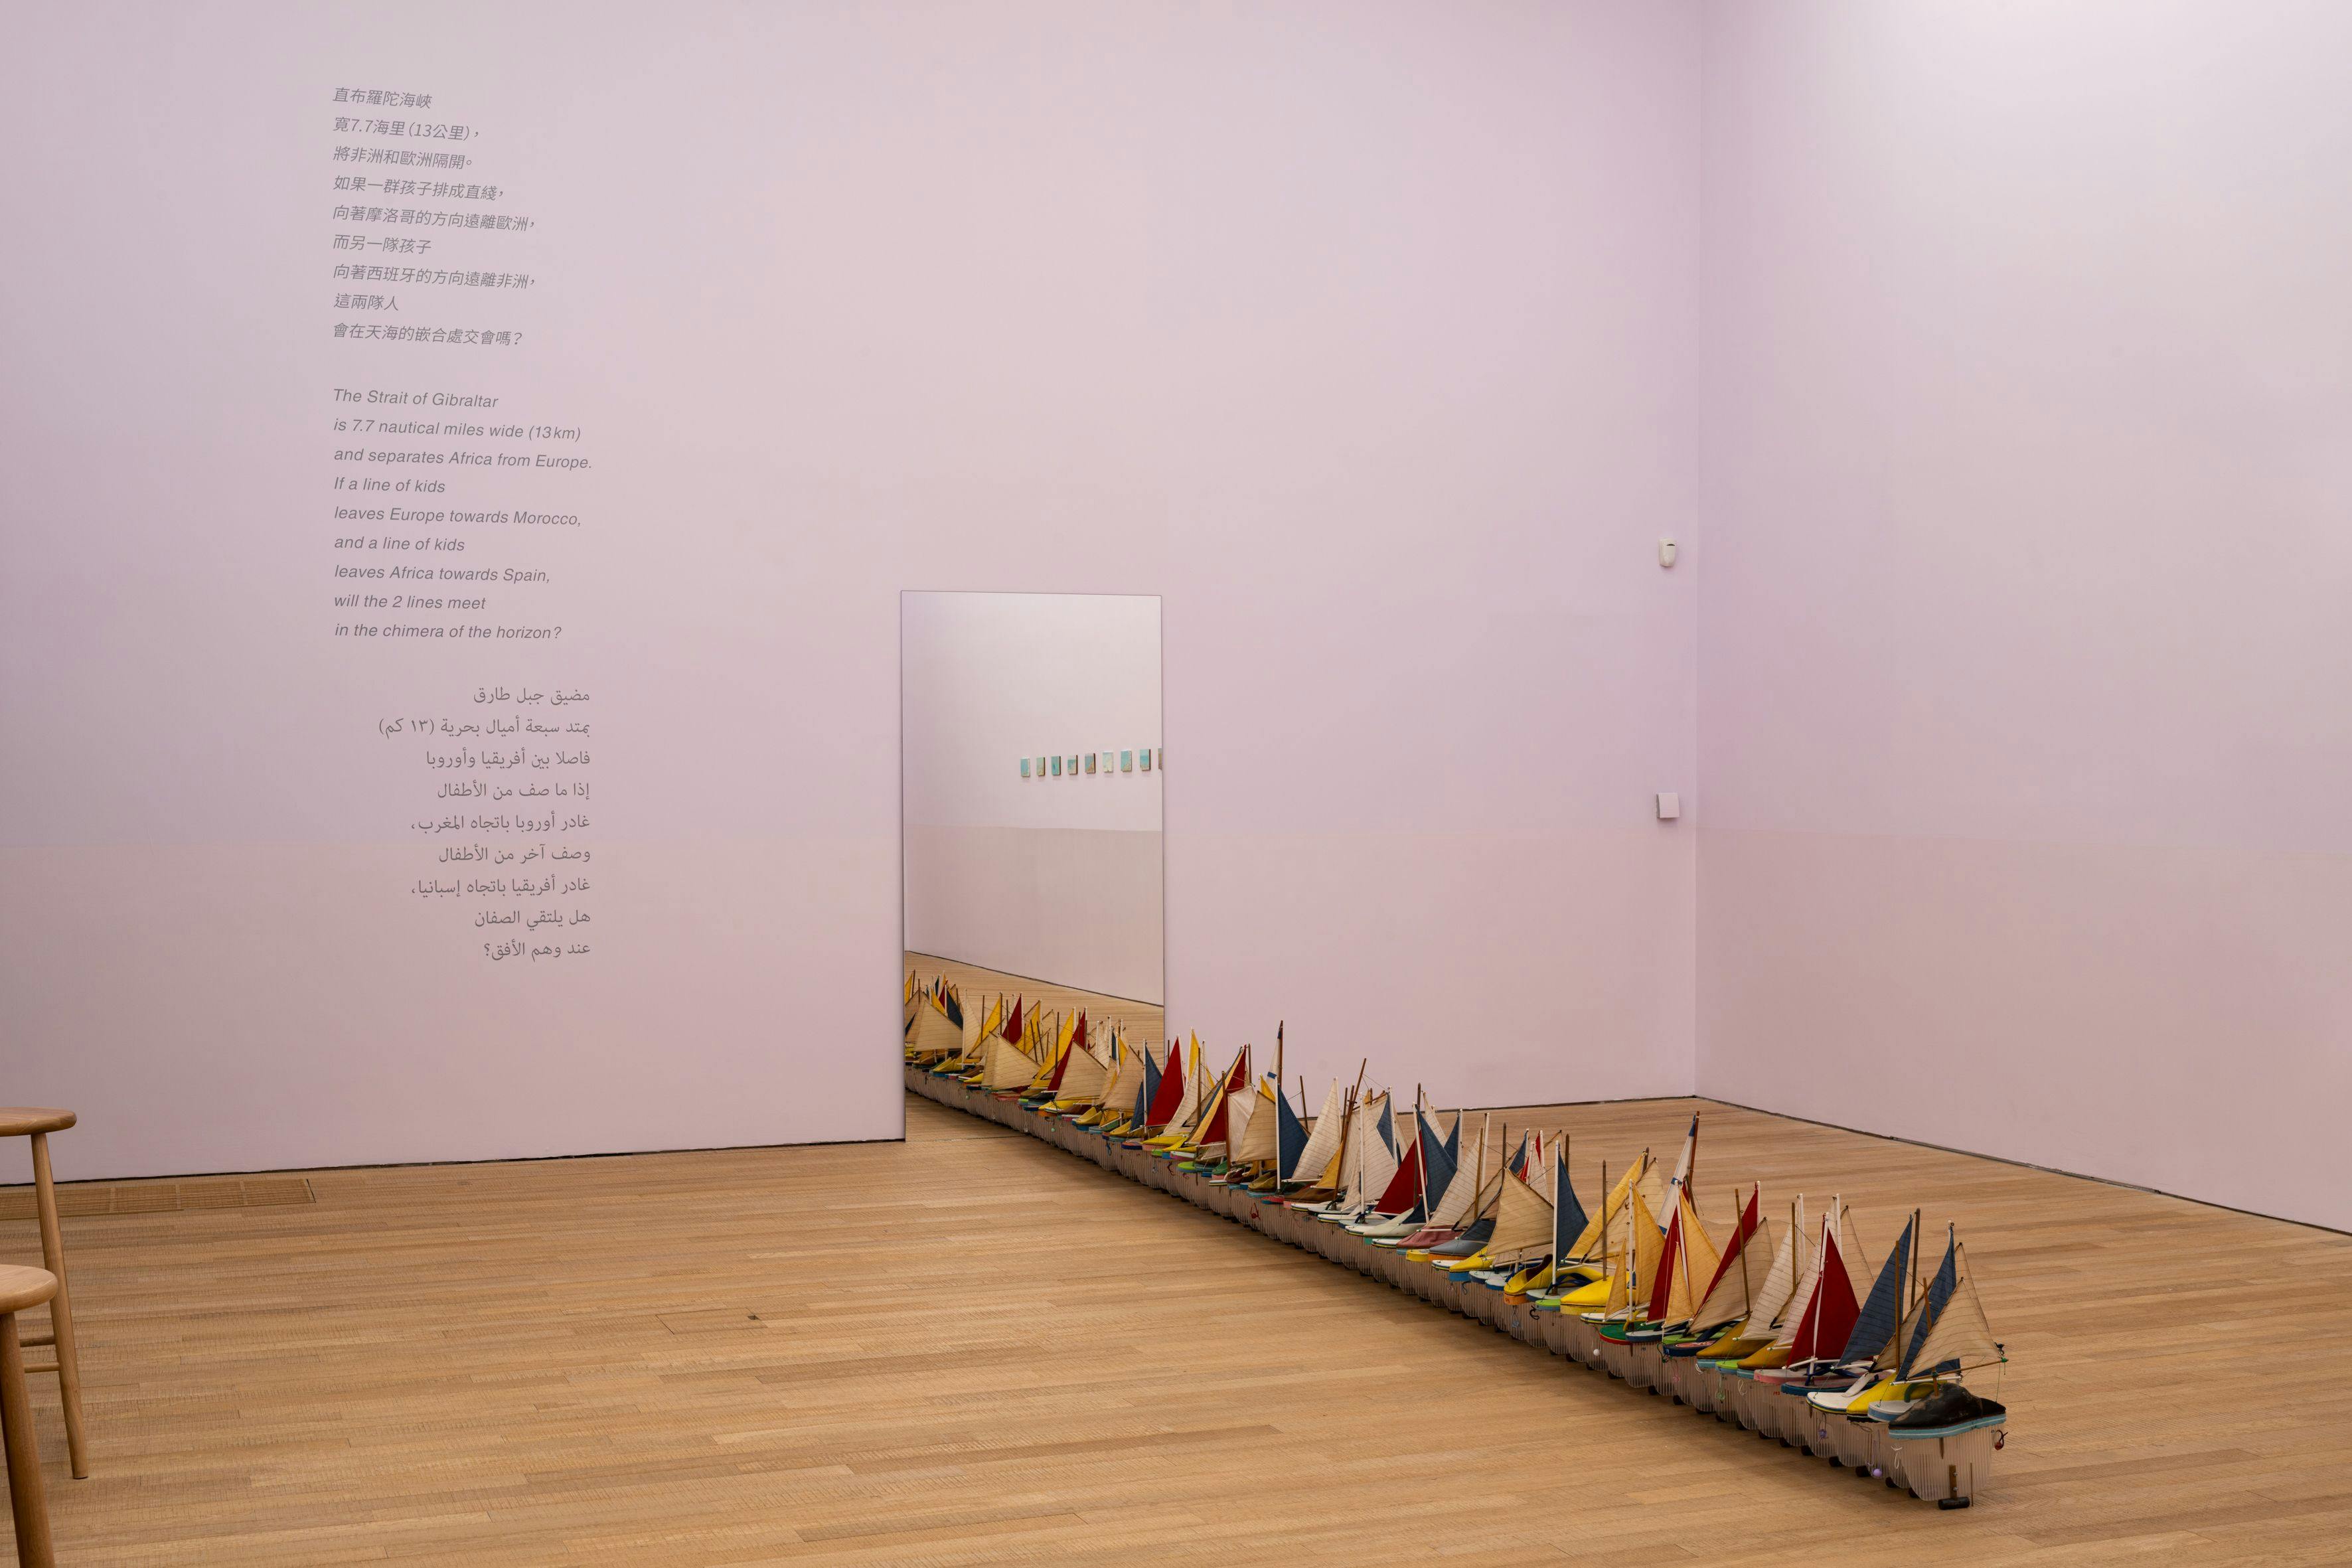 Installation view of the exhibition, Wet feet __ dry feet: borders and games, at Tai Kwun Contemporary in Hong Kong, dated 2020.